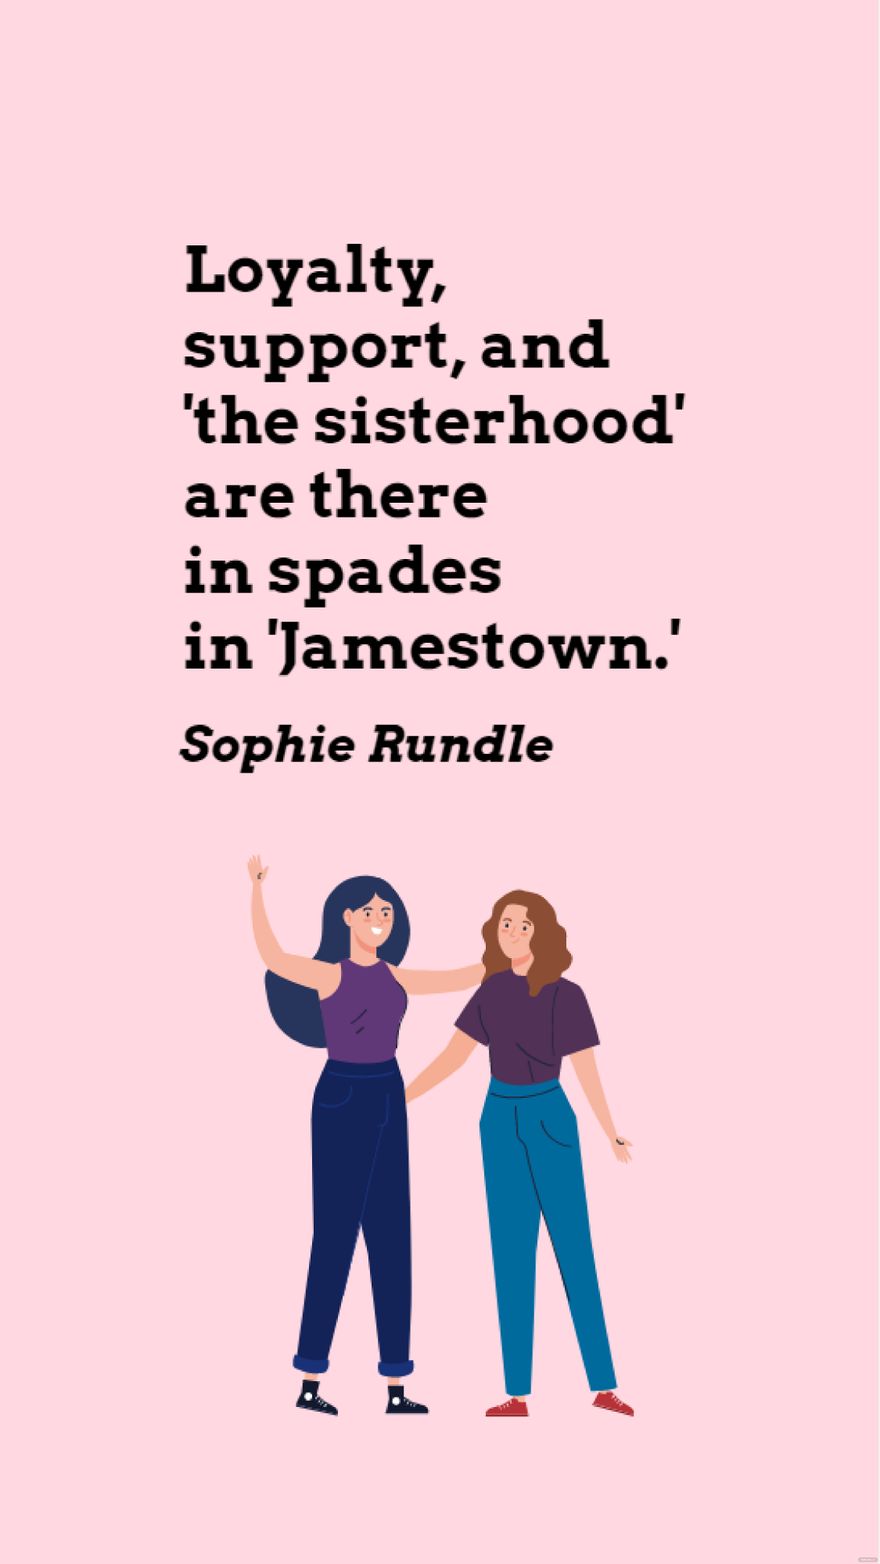 Sophie Rundle - Loyalty, support, and 'the sisterhood' are there in spades in 'Jamestown.'